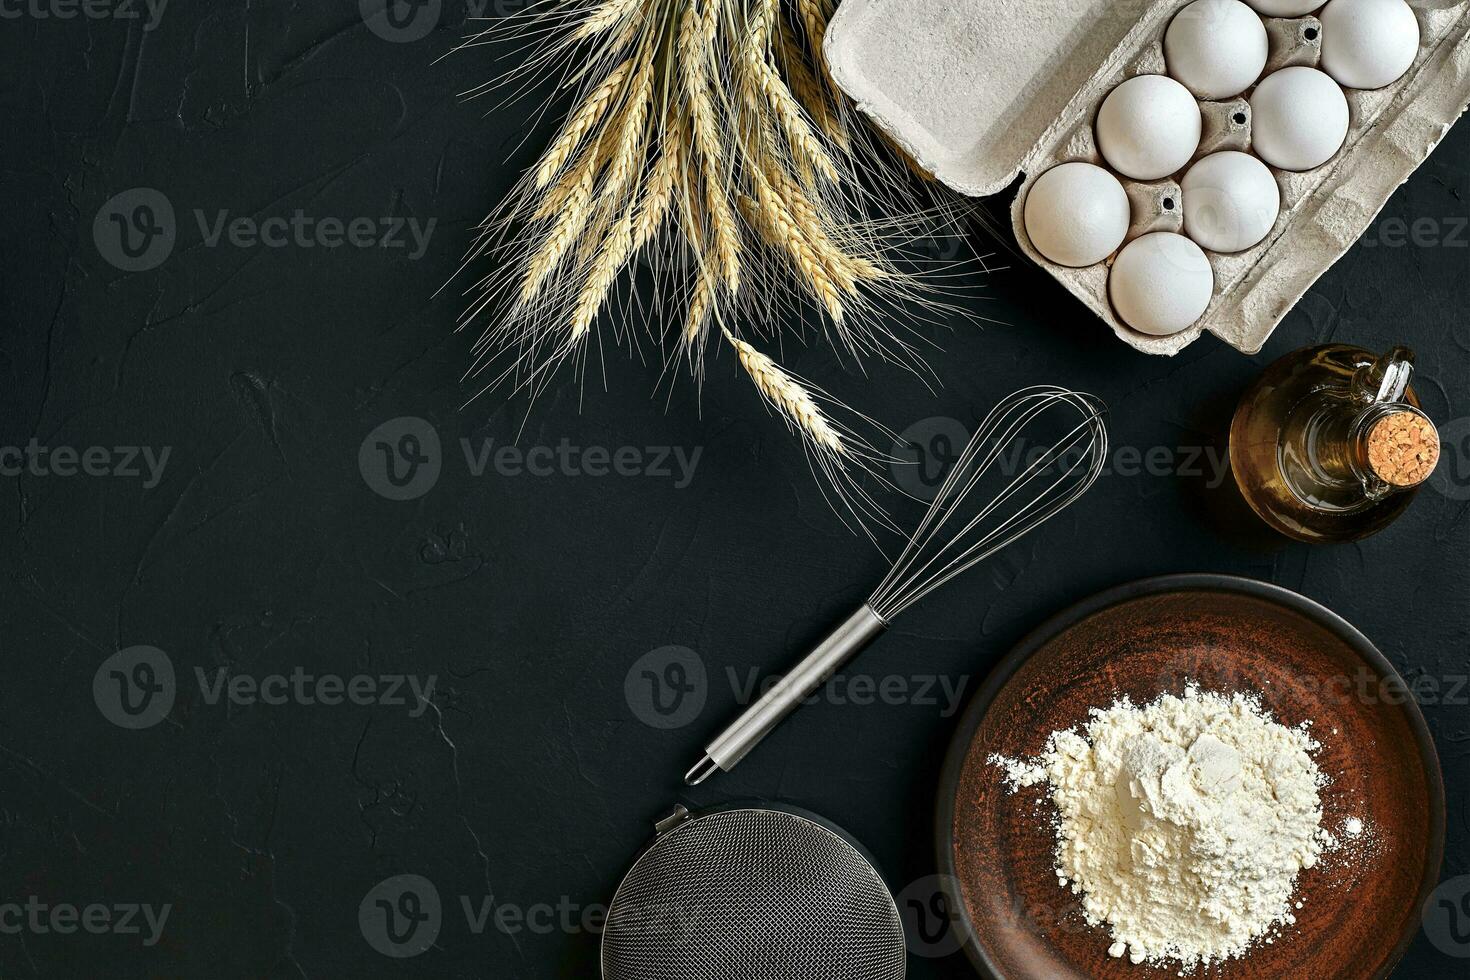 Preparation cooking baking kitchen table brown dishes ware fresh grocery different ingredients eggs, flour, oil, stuff top view photo